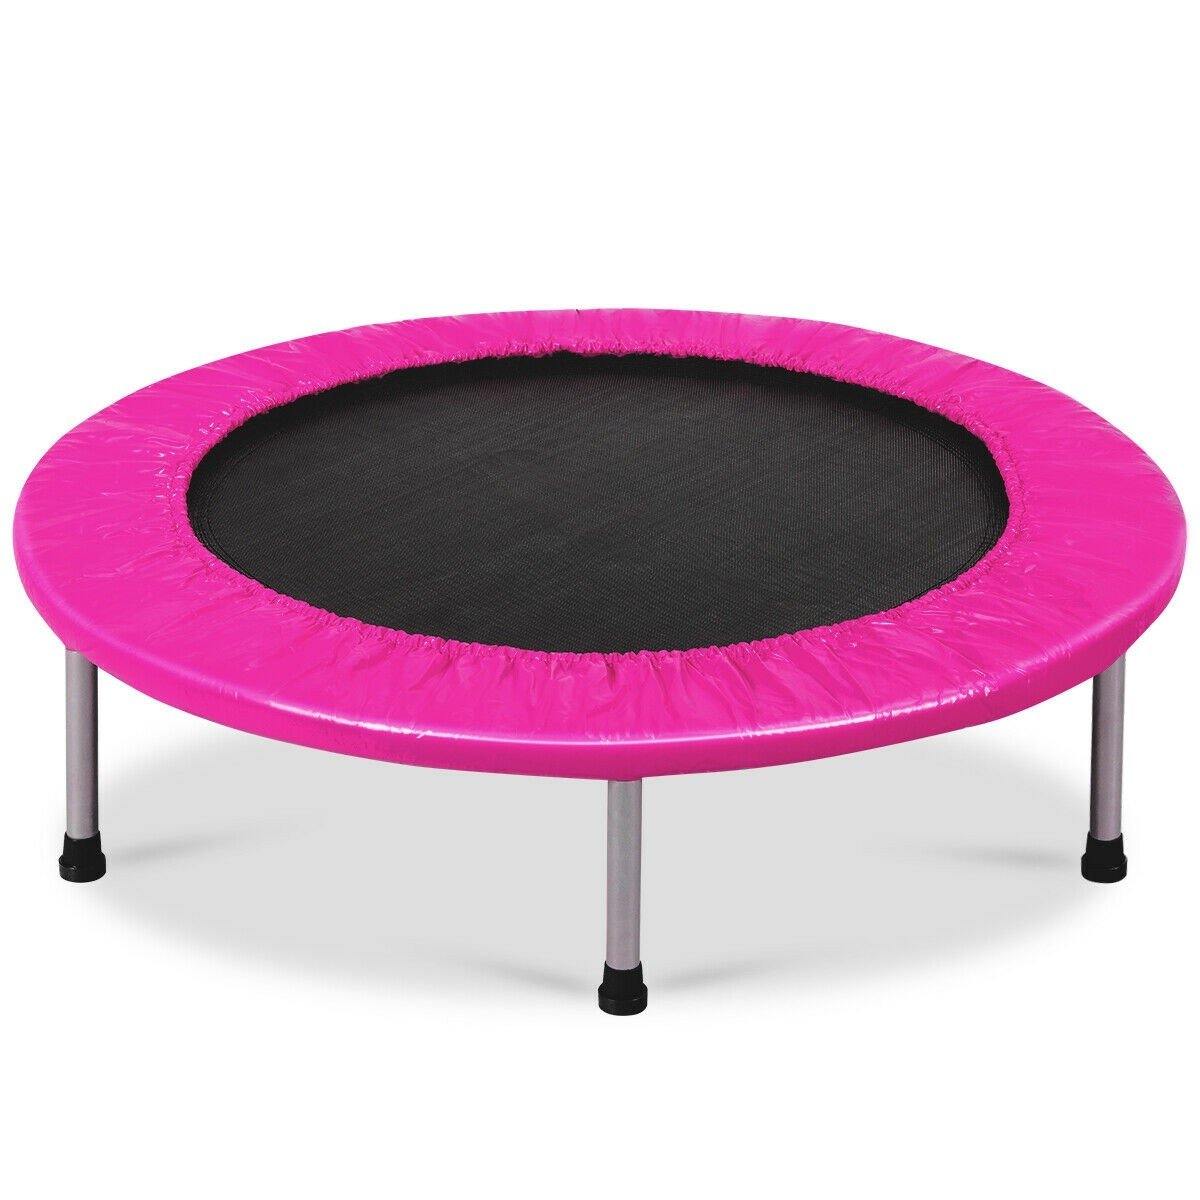 Mini Fitness Trampoline for Adults and Kids, 38 Inch Rebounder Trampoline - Giantexus